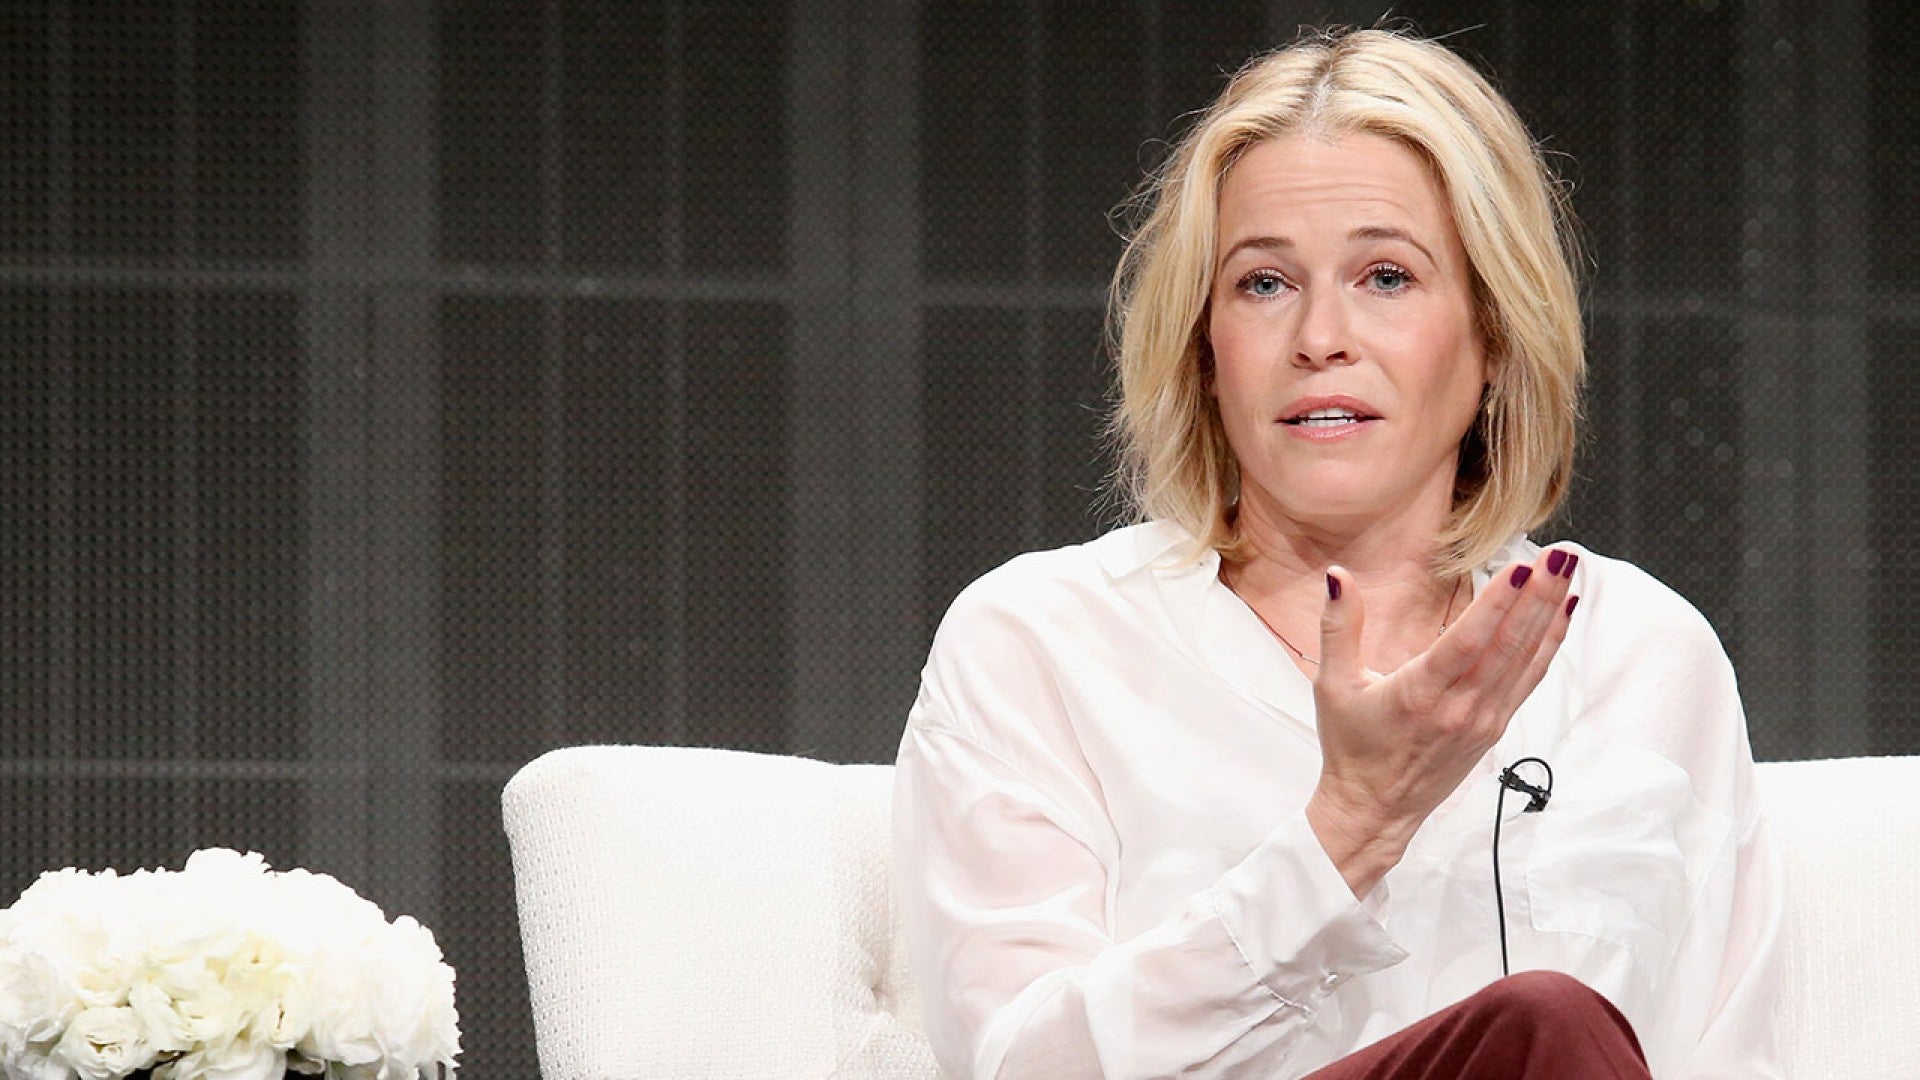 Chelsea Handler Tits - Chelsea Handler Reveals Why She Posts All Those Nude Photos